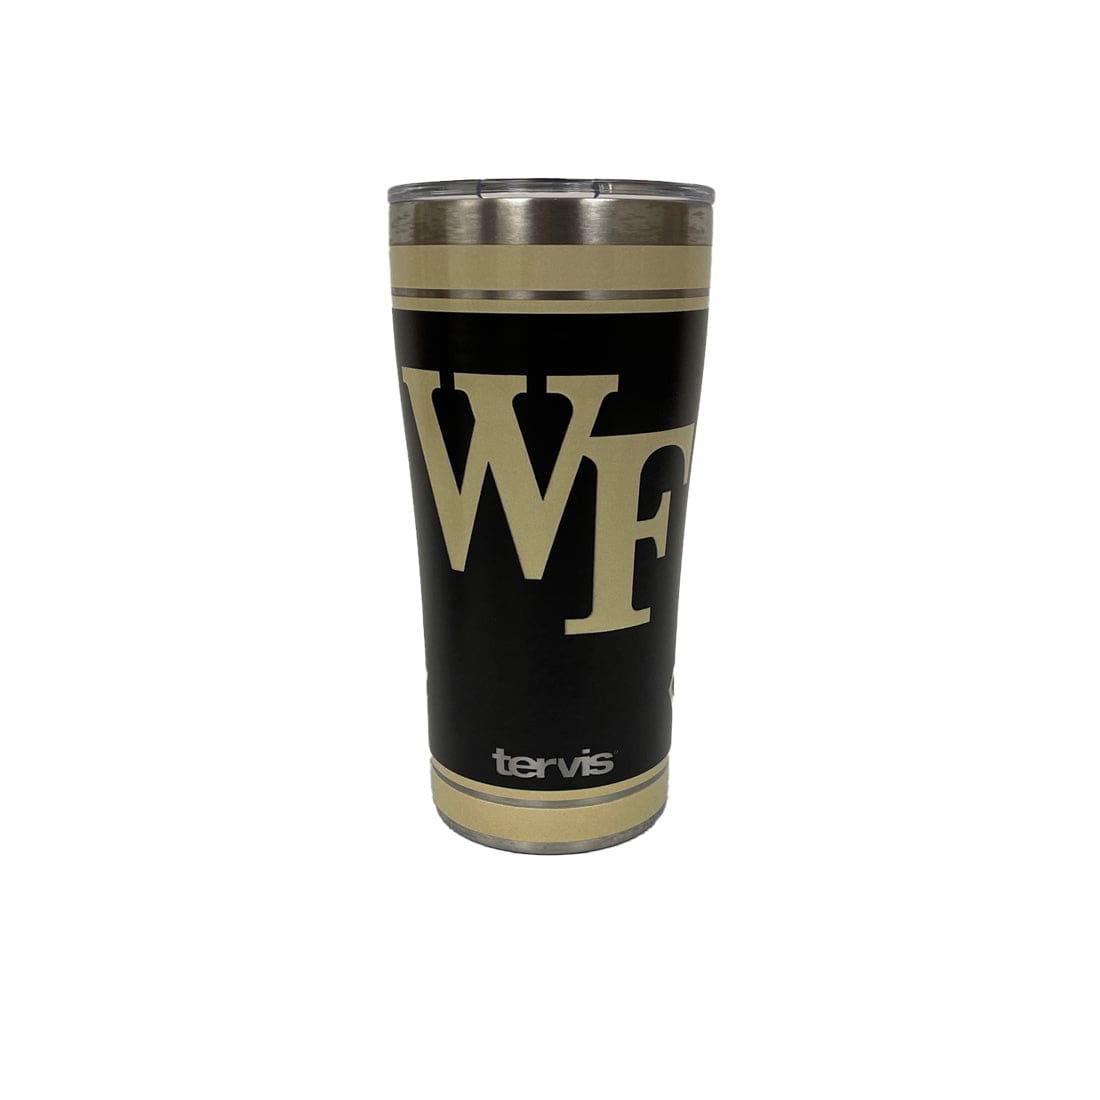 https://cdn.shopify.com/s/files/1/0472/3146/7683/products/tervis-stainless-steel-20-oz-wake-forest-campus-tumbler-with-slider-lid-36239398011043_1600x.jpg?v=1669990417